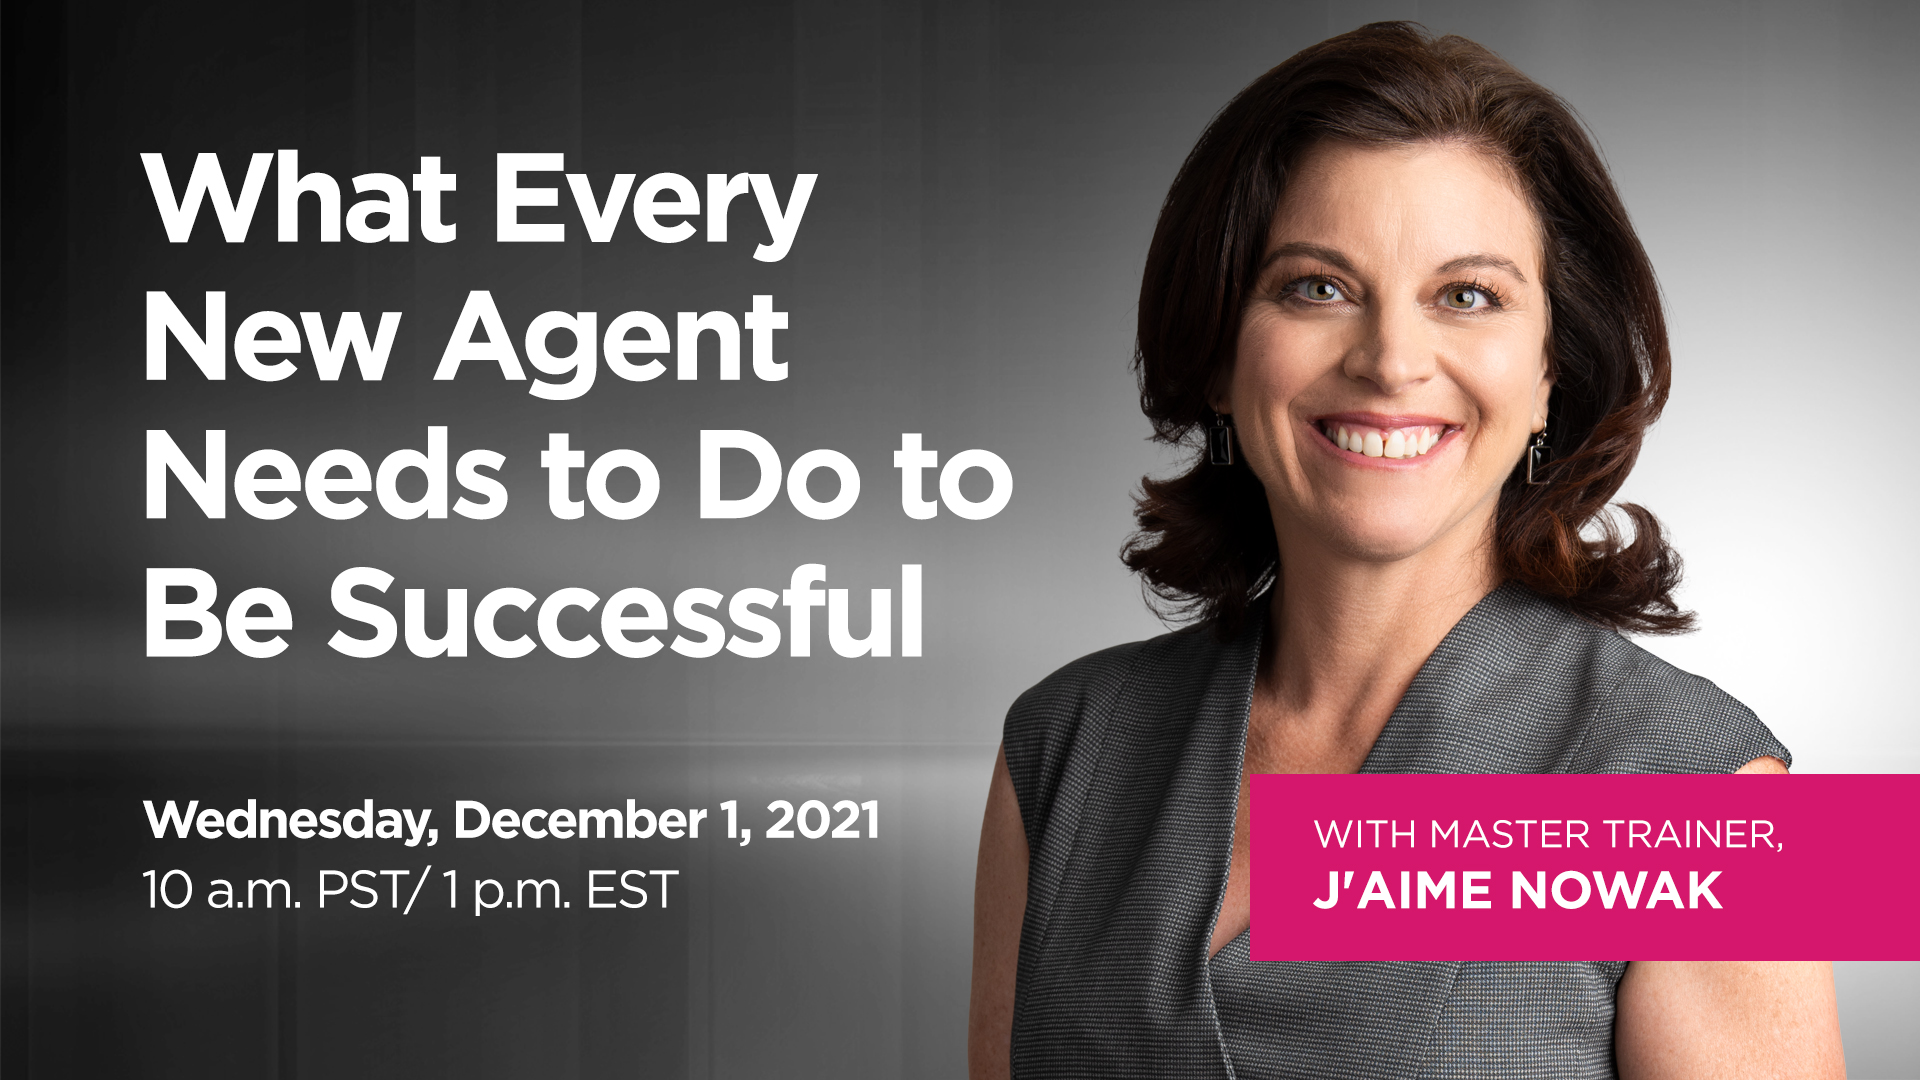 What Every New Agent Needs to Do to Be Successful